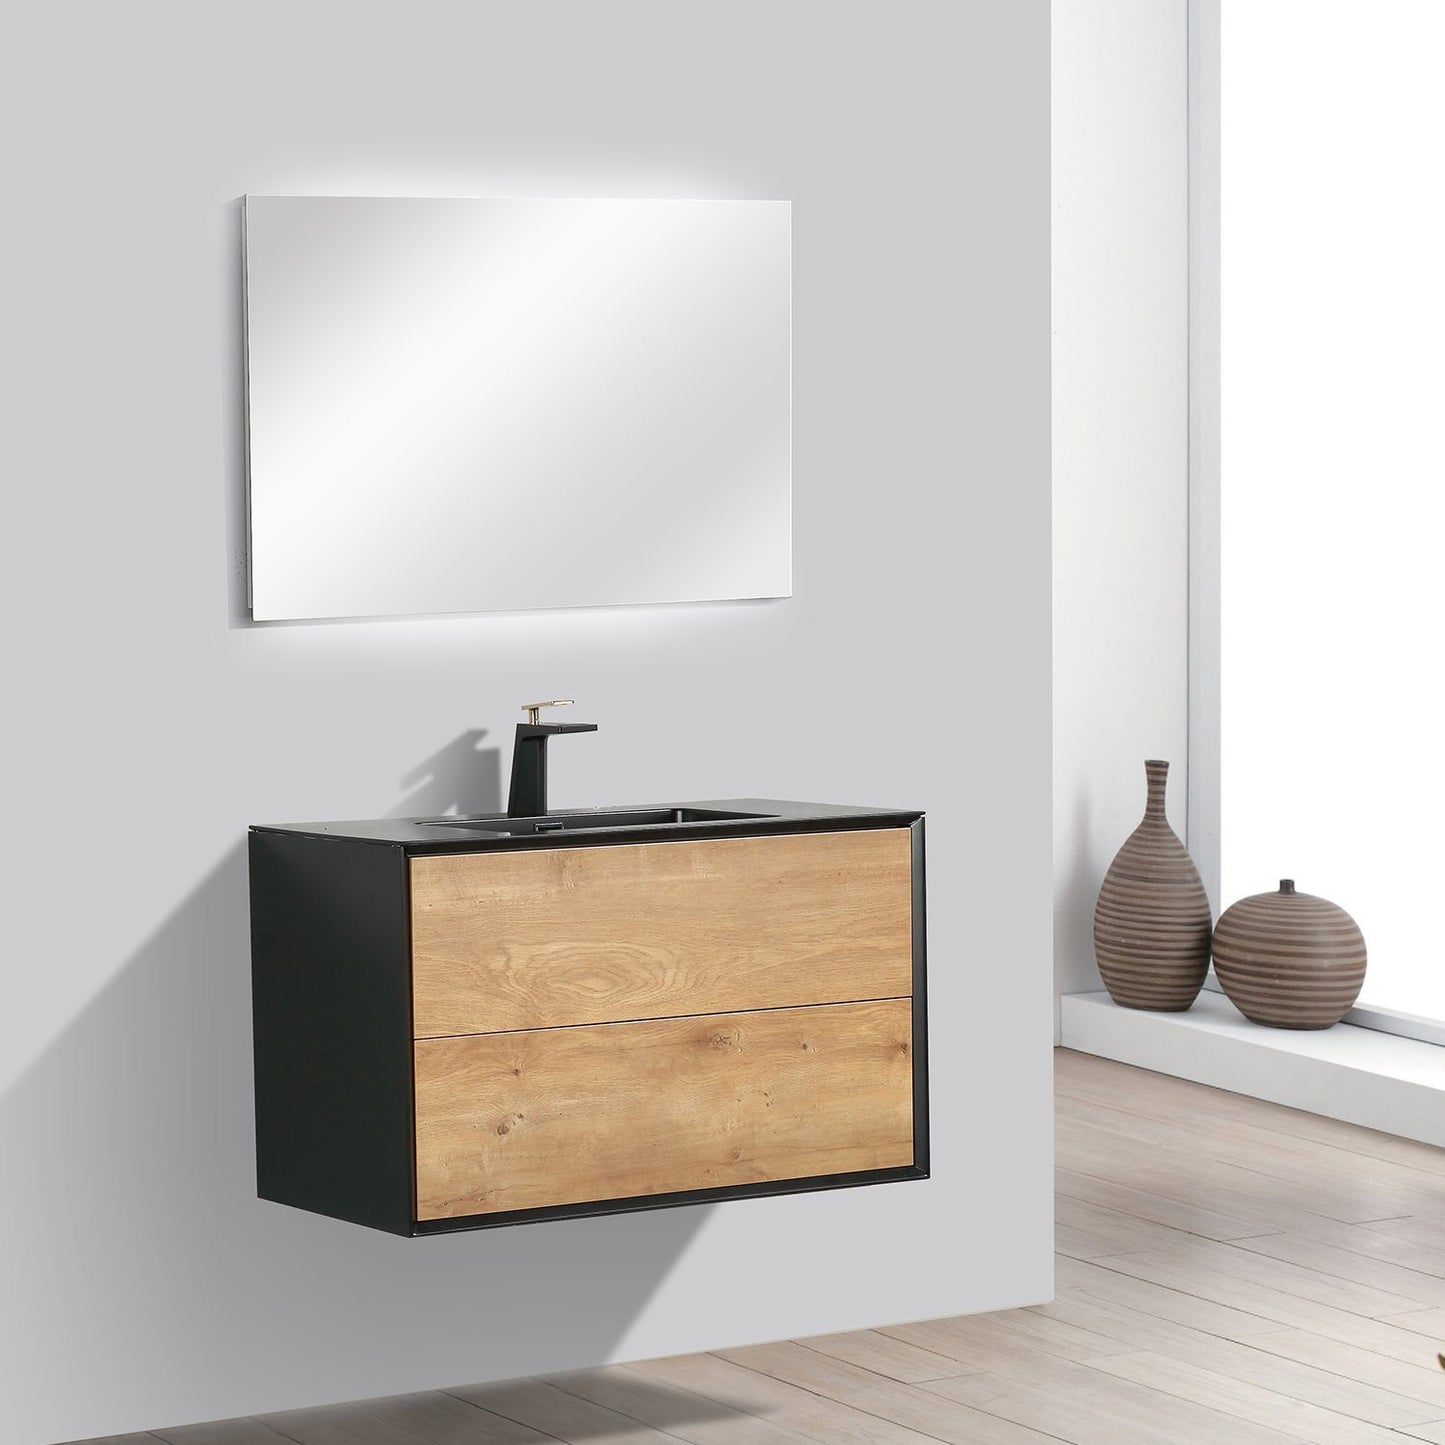 Eviva Vienna 36 in. Oak Wall Mount Bathroom Vanity with White Integrated Acrylic Sink - Luxe Bathroom Vanities Luxury Bathroom Fixtures Bathroom Furniture